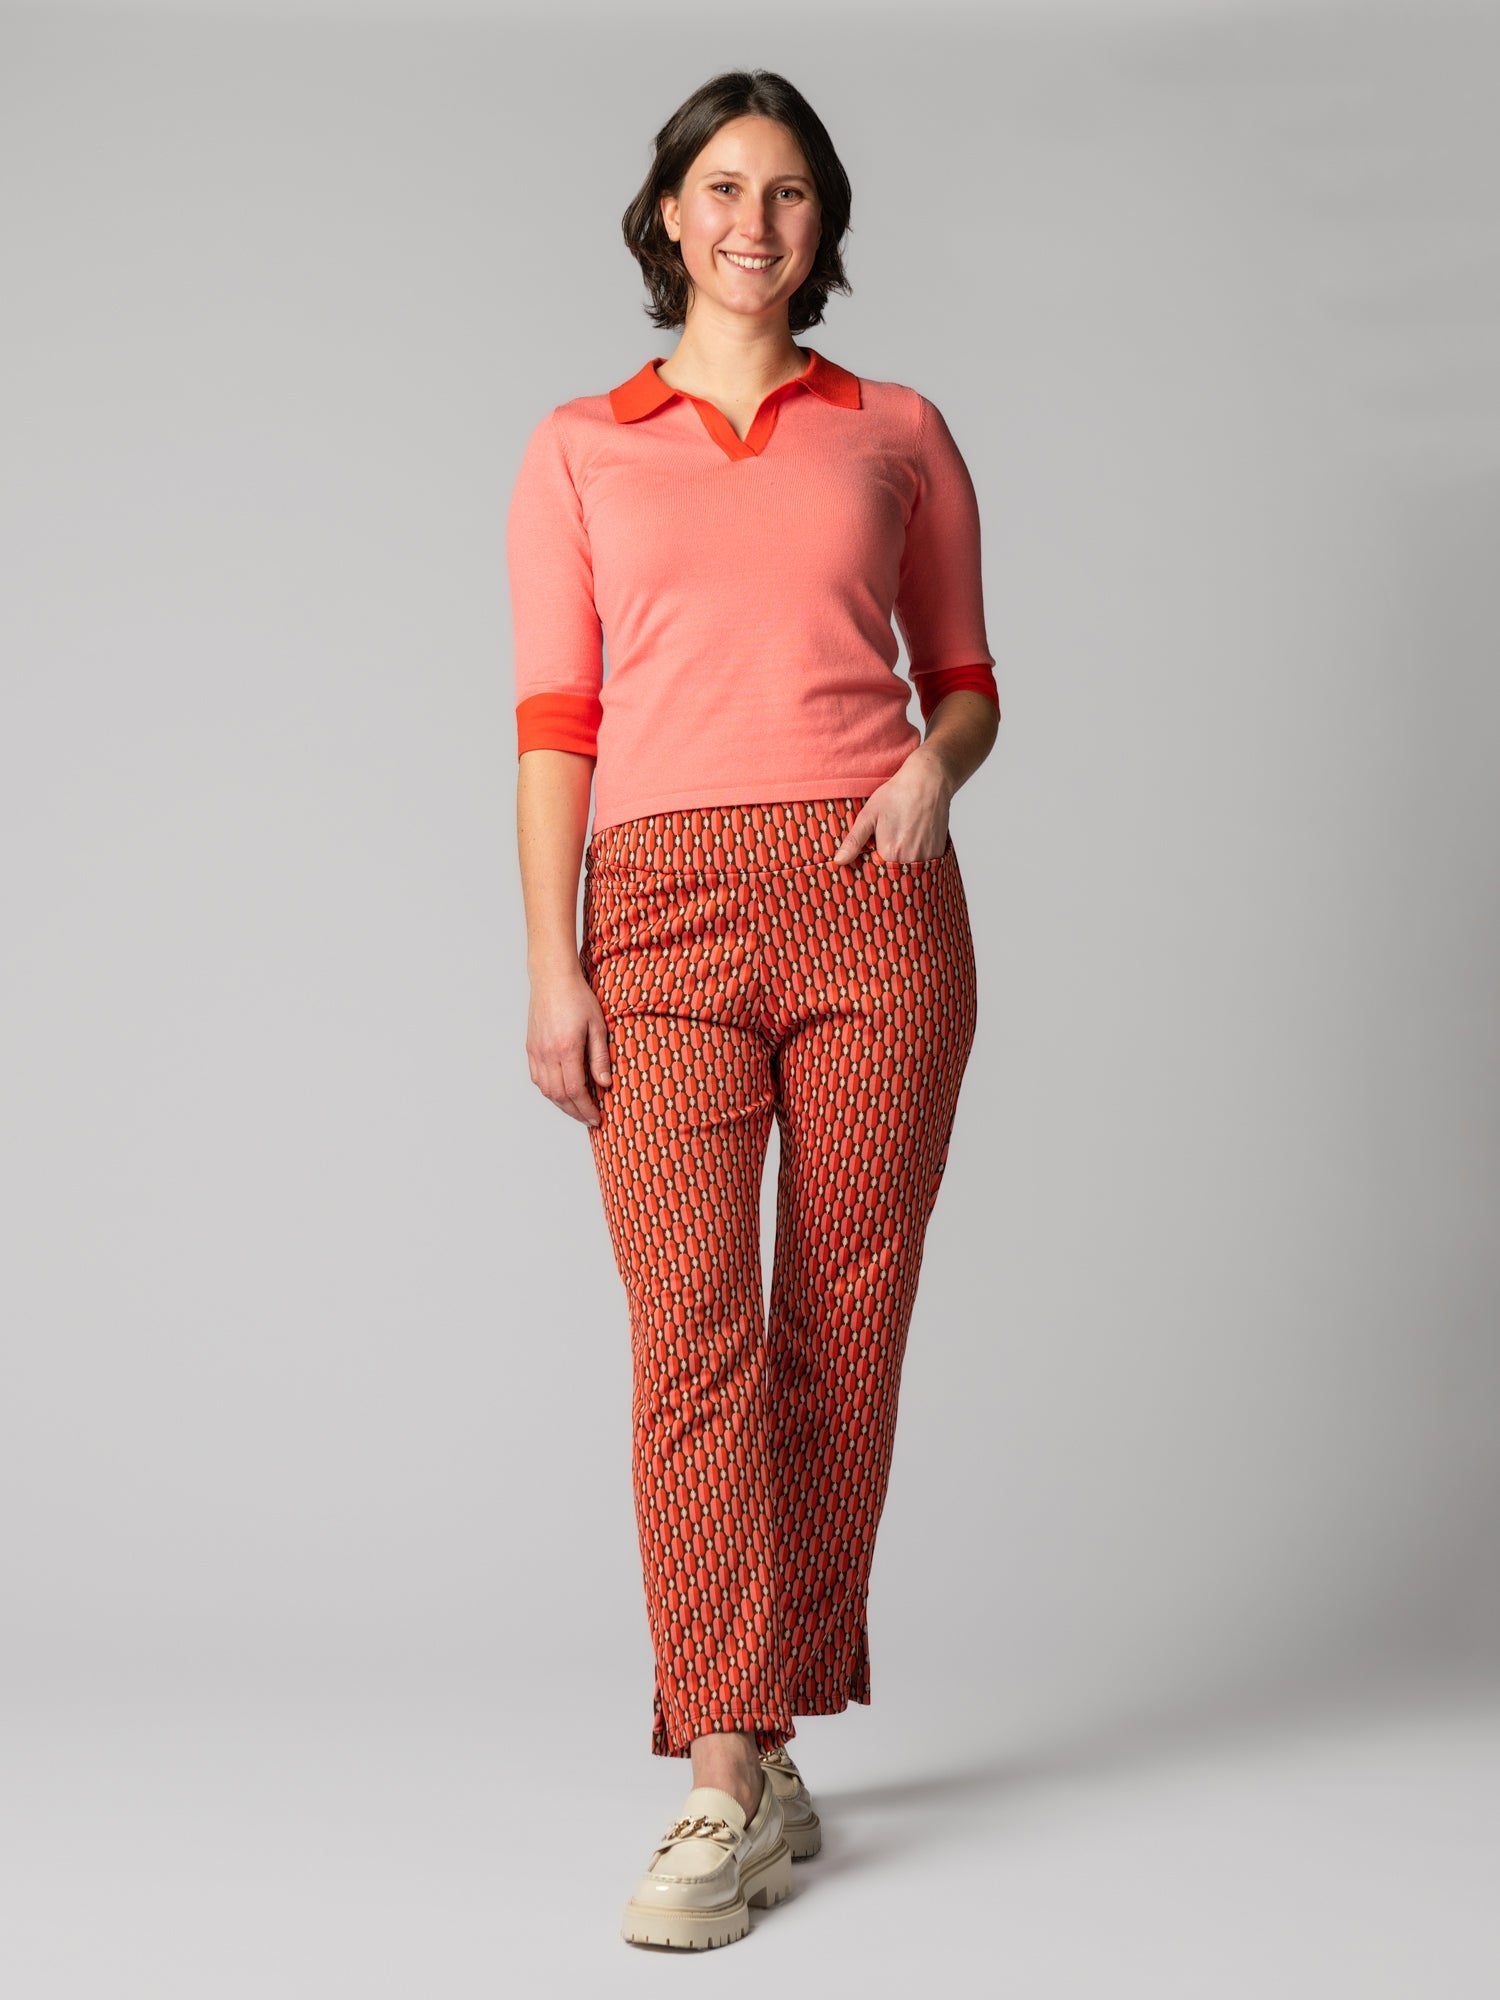 IMOGEN pant Pink and Red Jacquard - Lesley Evers-ankle pant-high waisted-Imogen Pink Capsule